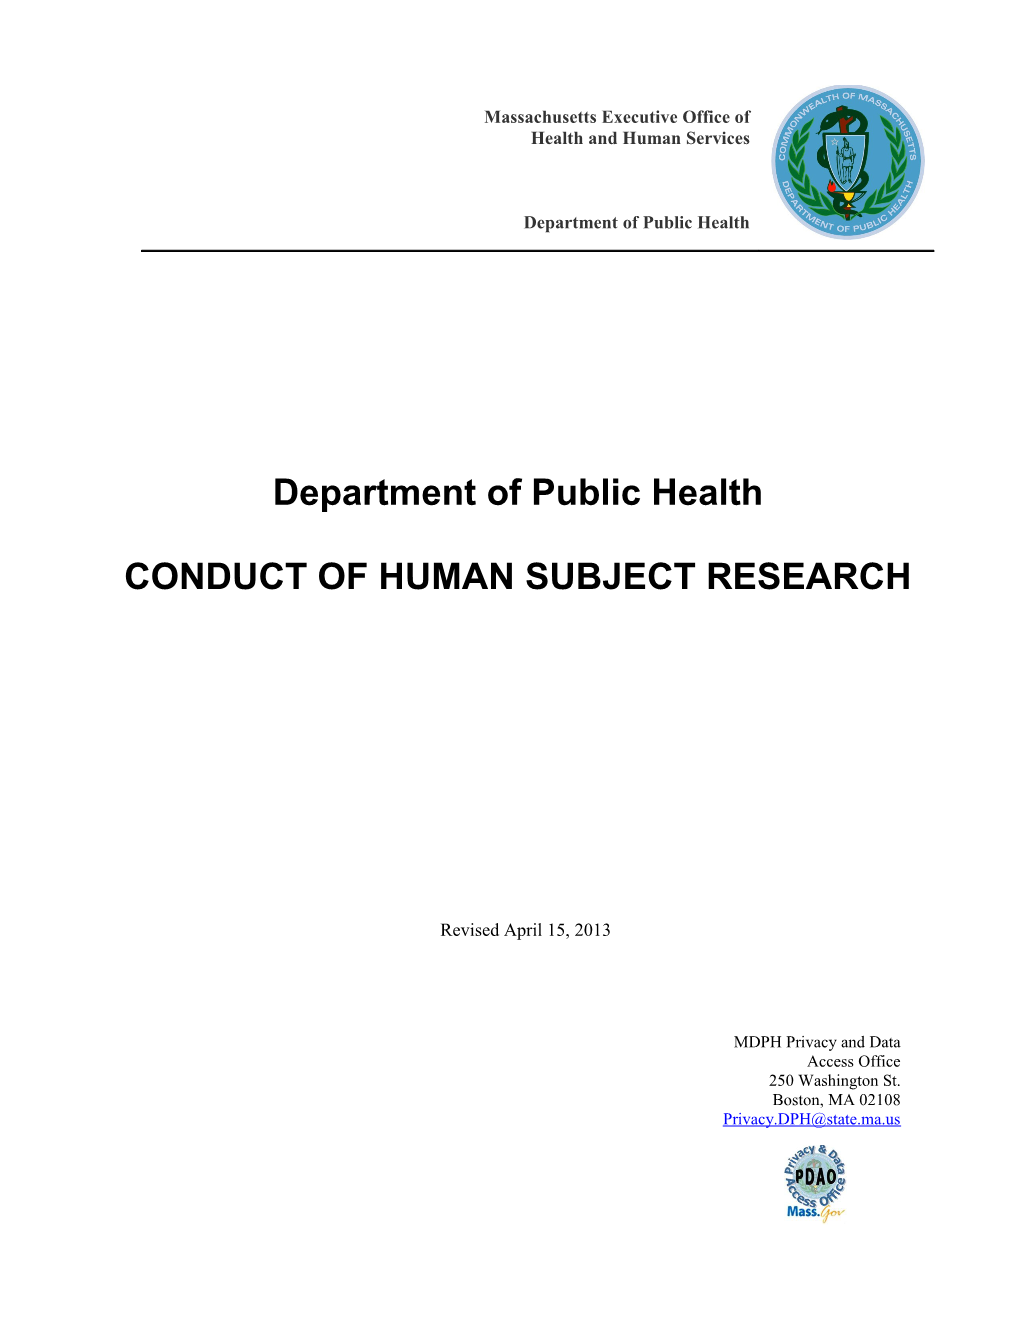 Conduct of Human Subject Research